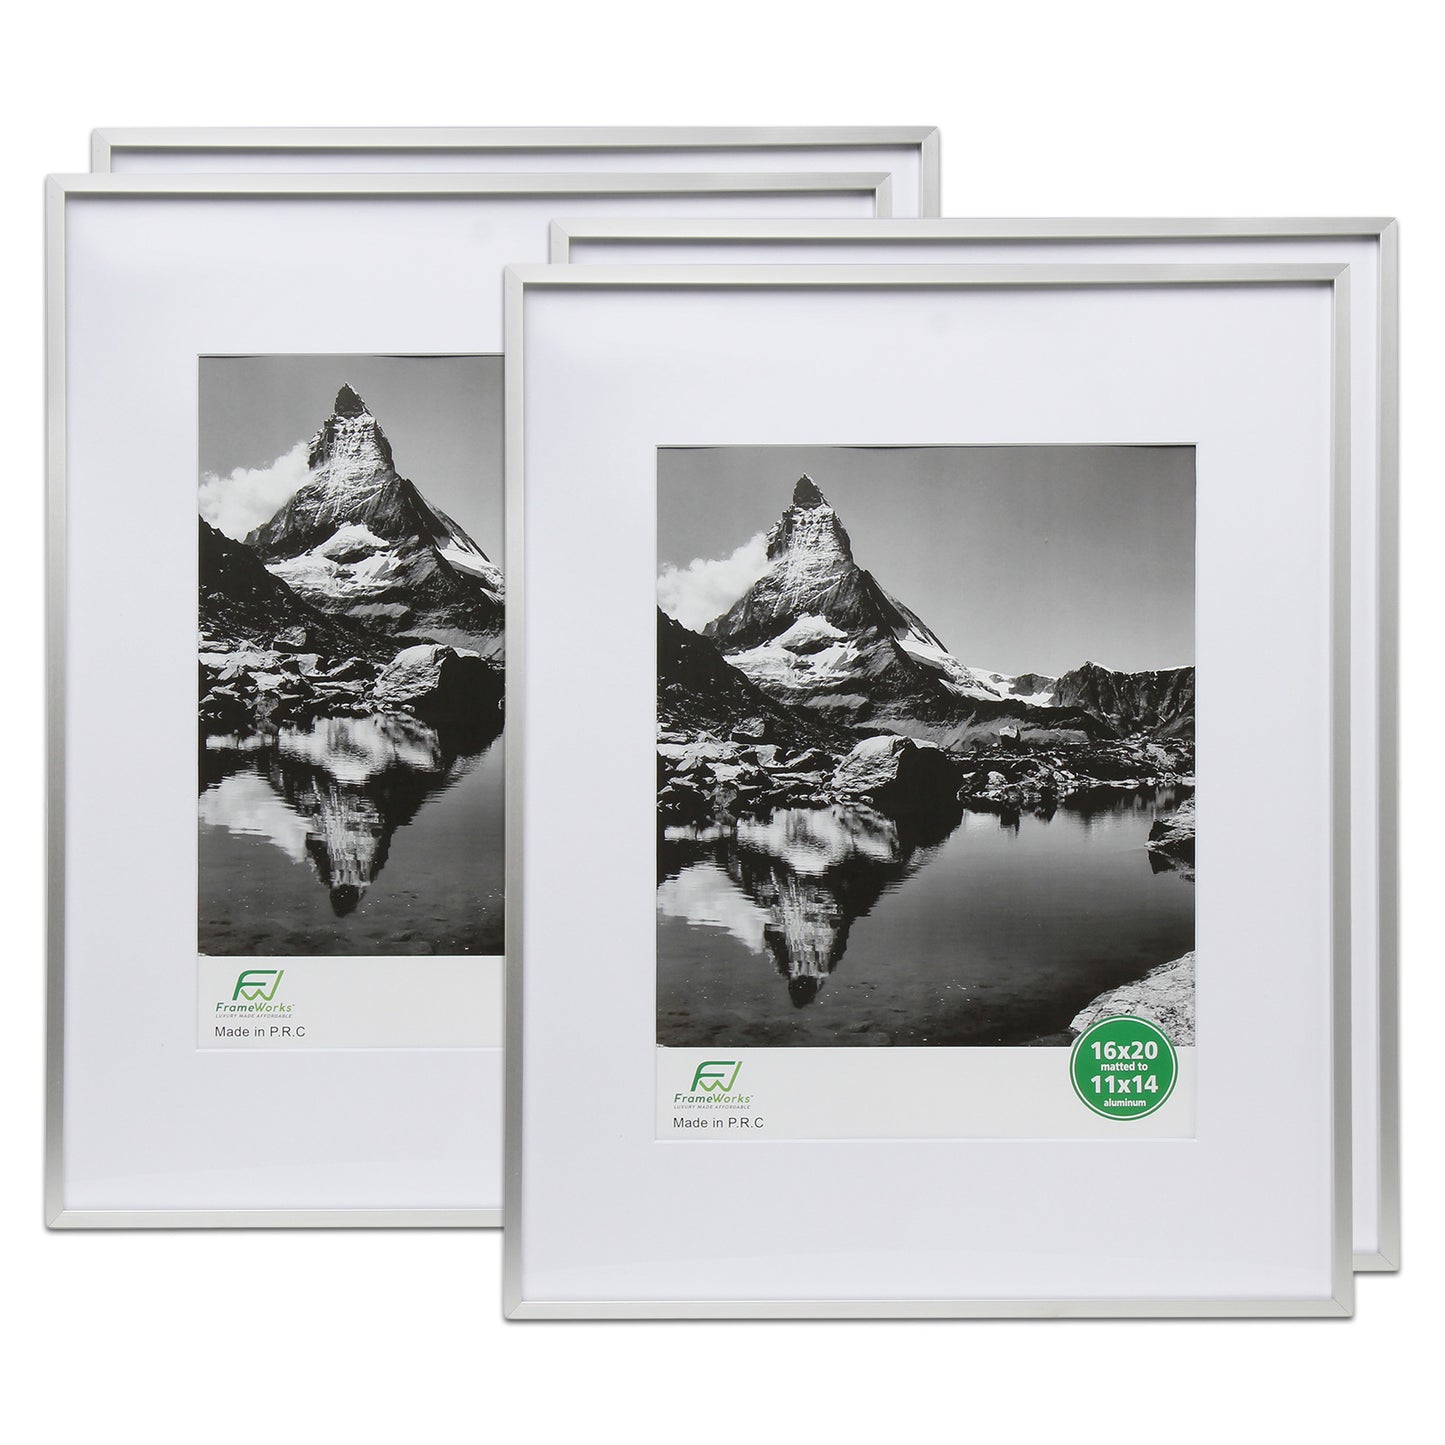 16" x 20" Deluxe Silver Aluminum Contemporary Picture Frame, 11" x 14" Matted